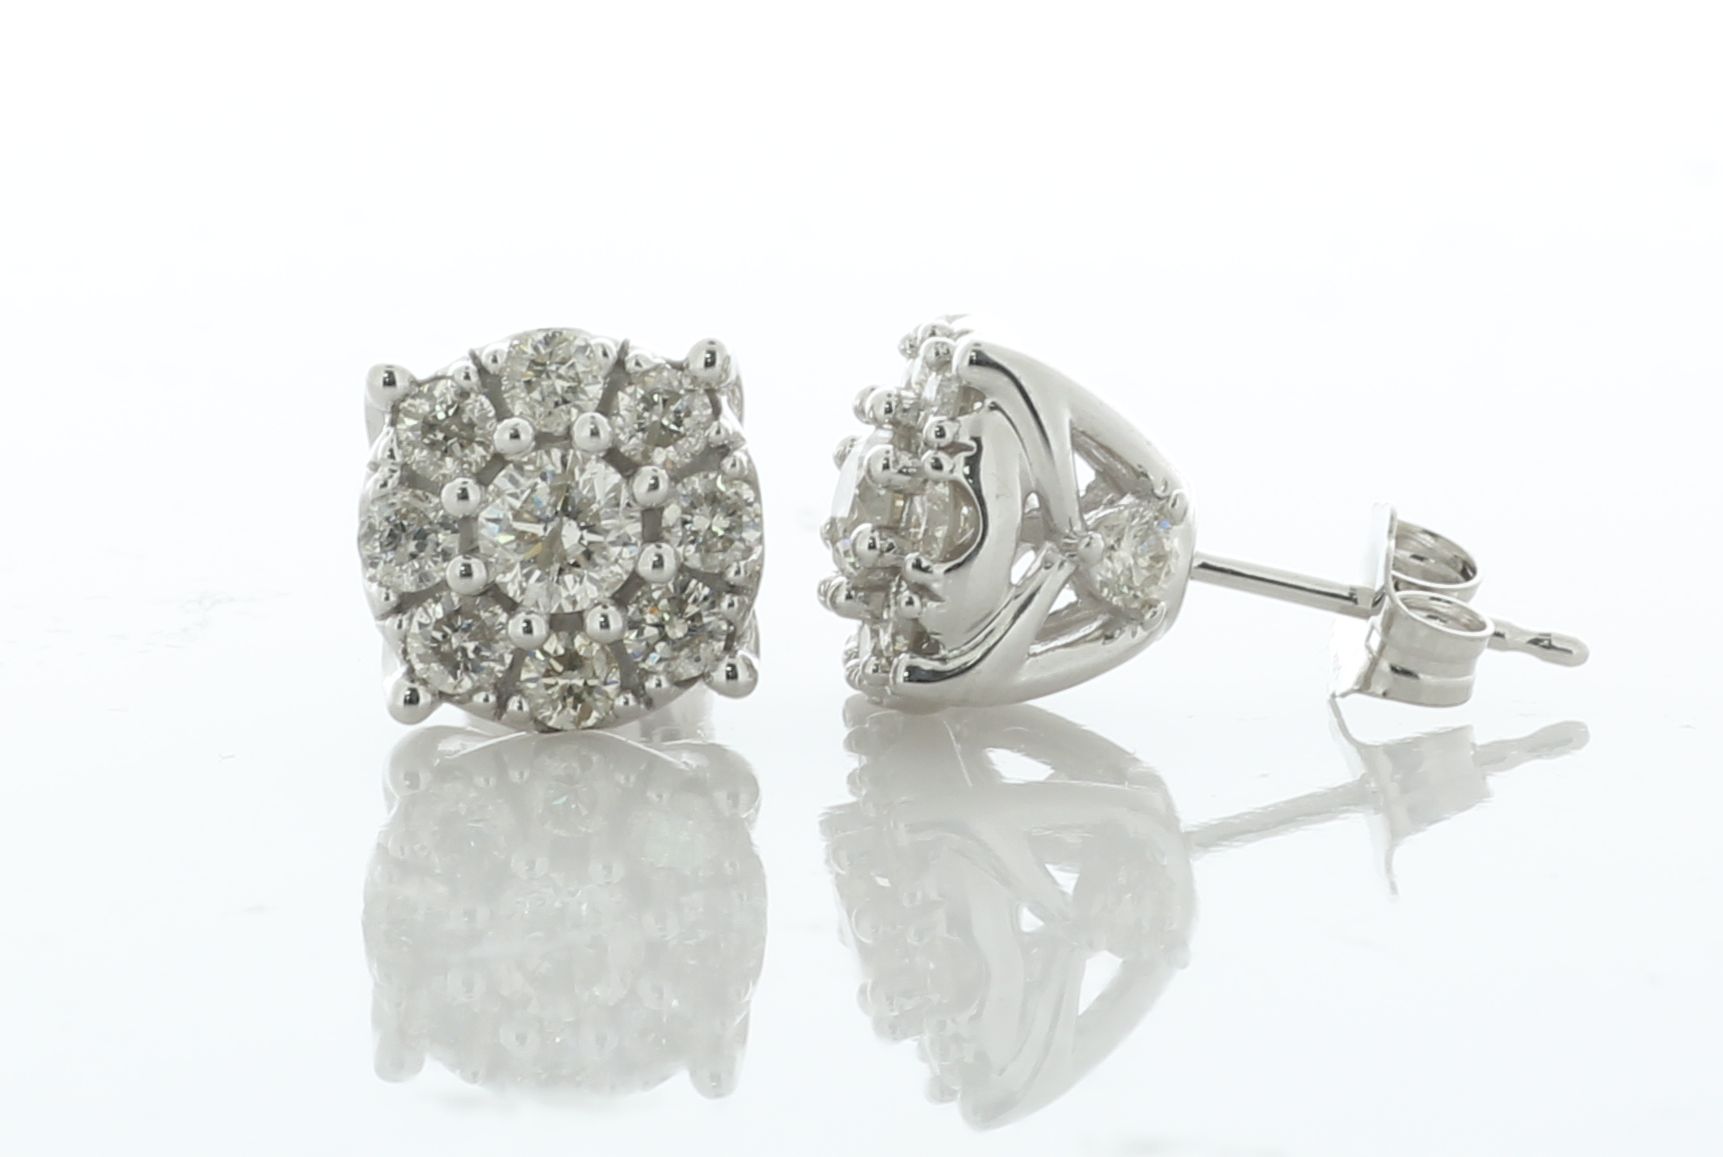 10ct Gold Ladies Cluster Diamond Earring 1.50 Carats - Valued By AGI £3,950.00 - Each of these